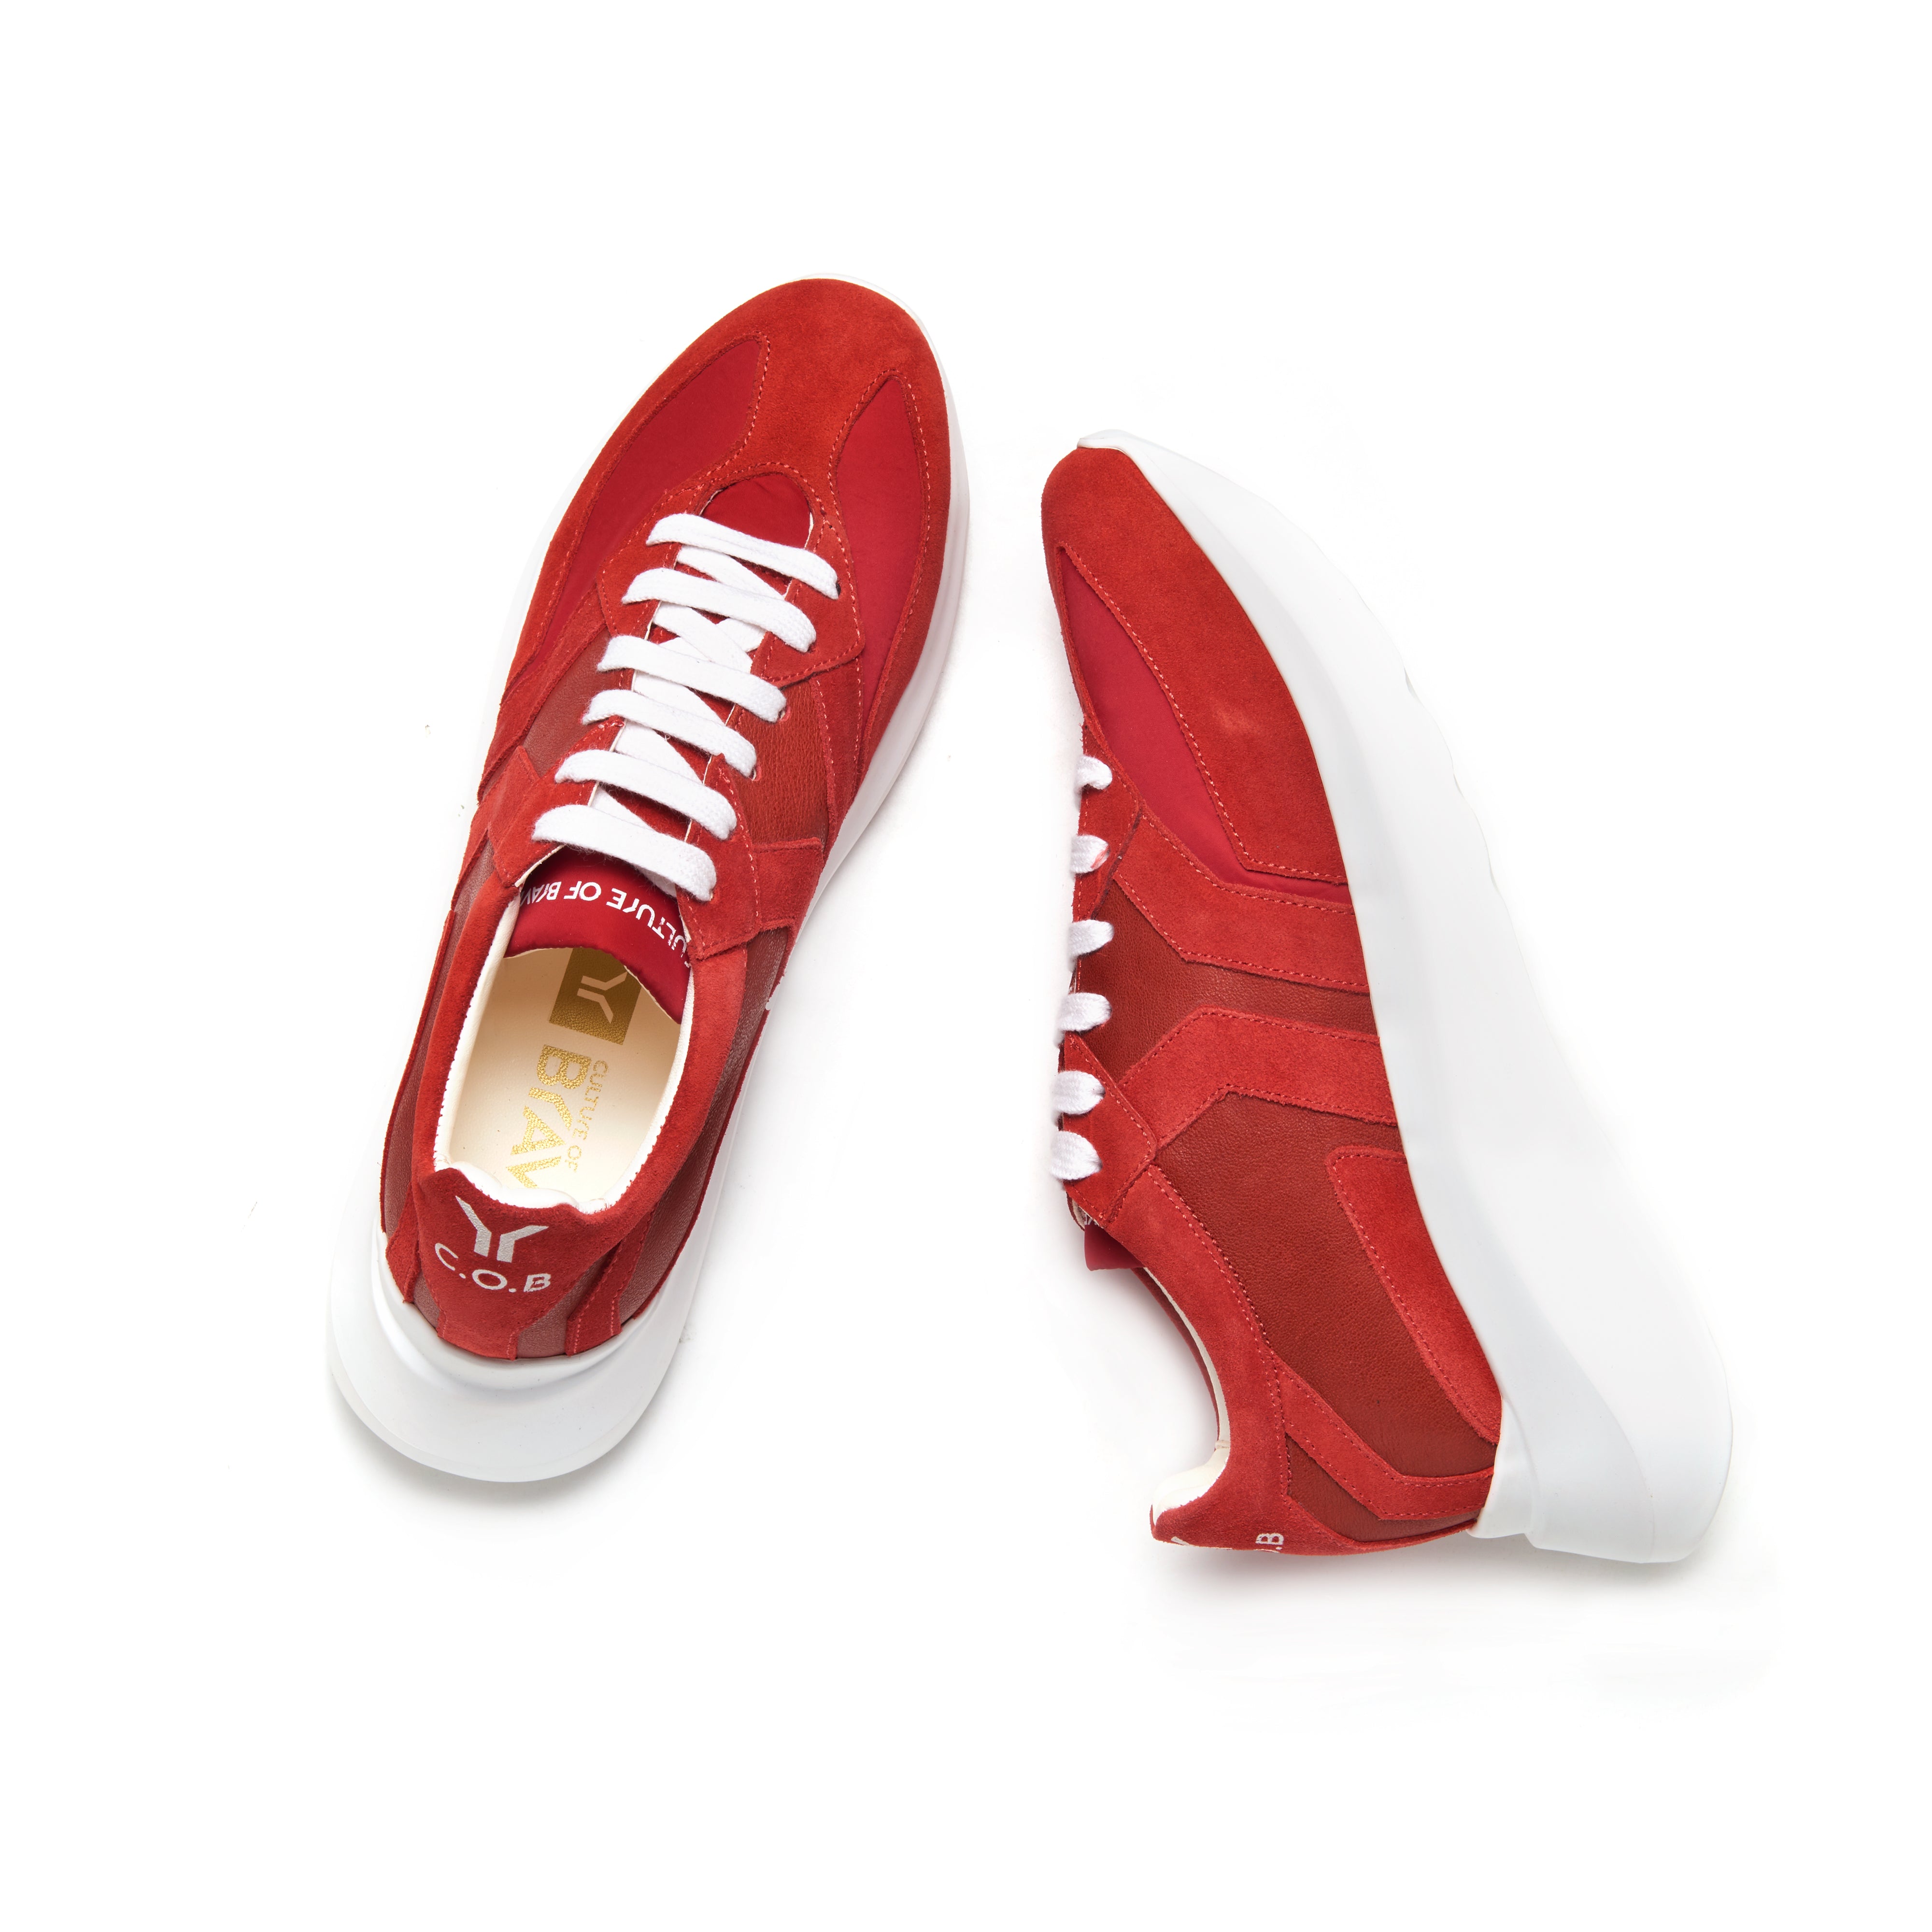 Free Soul_6 Men Red leather red wing low cut